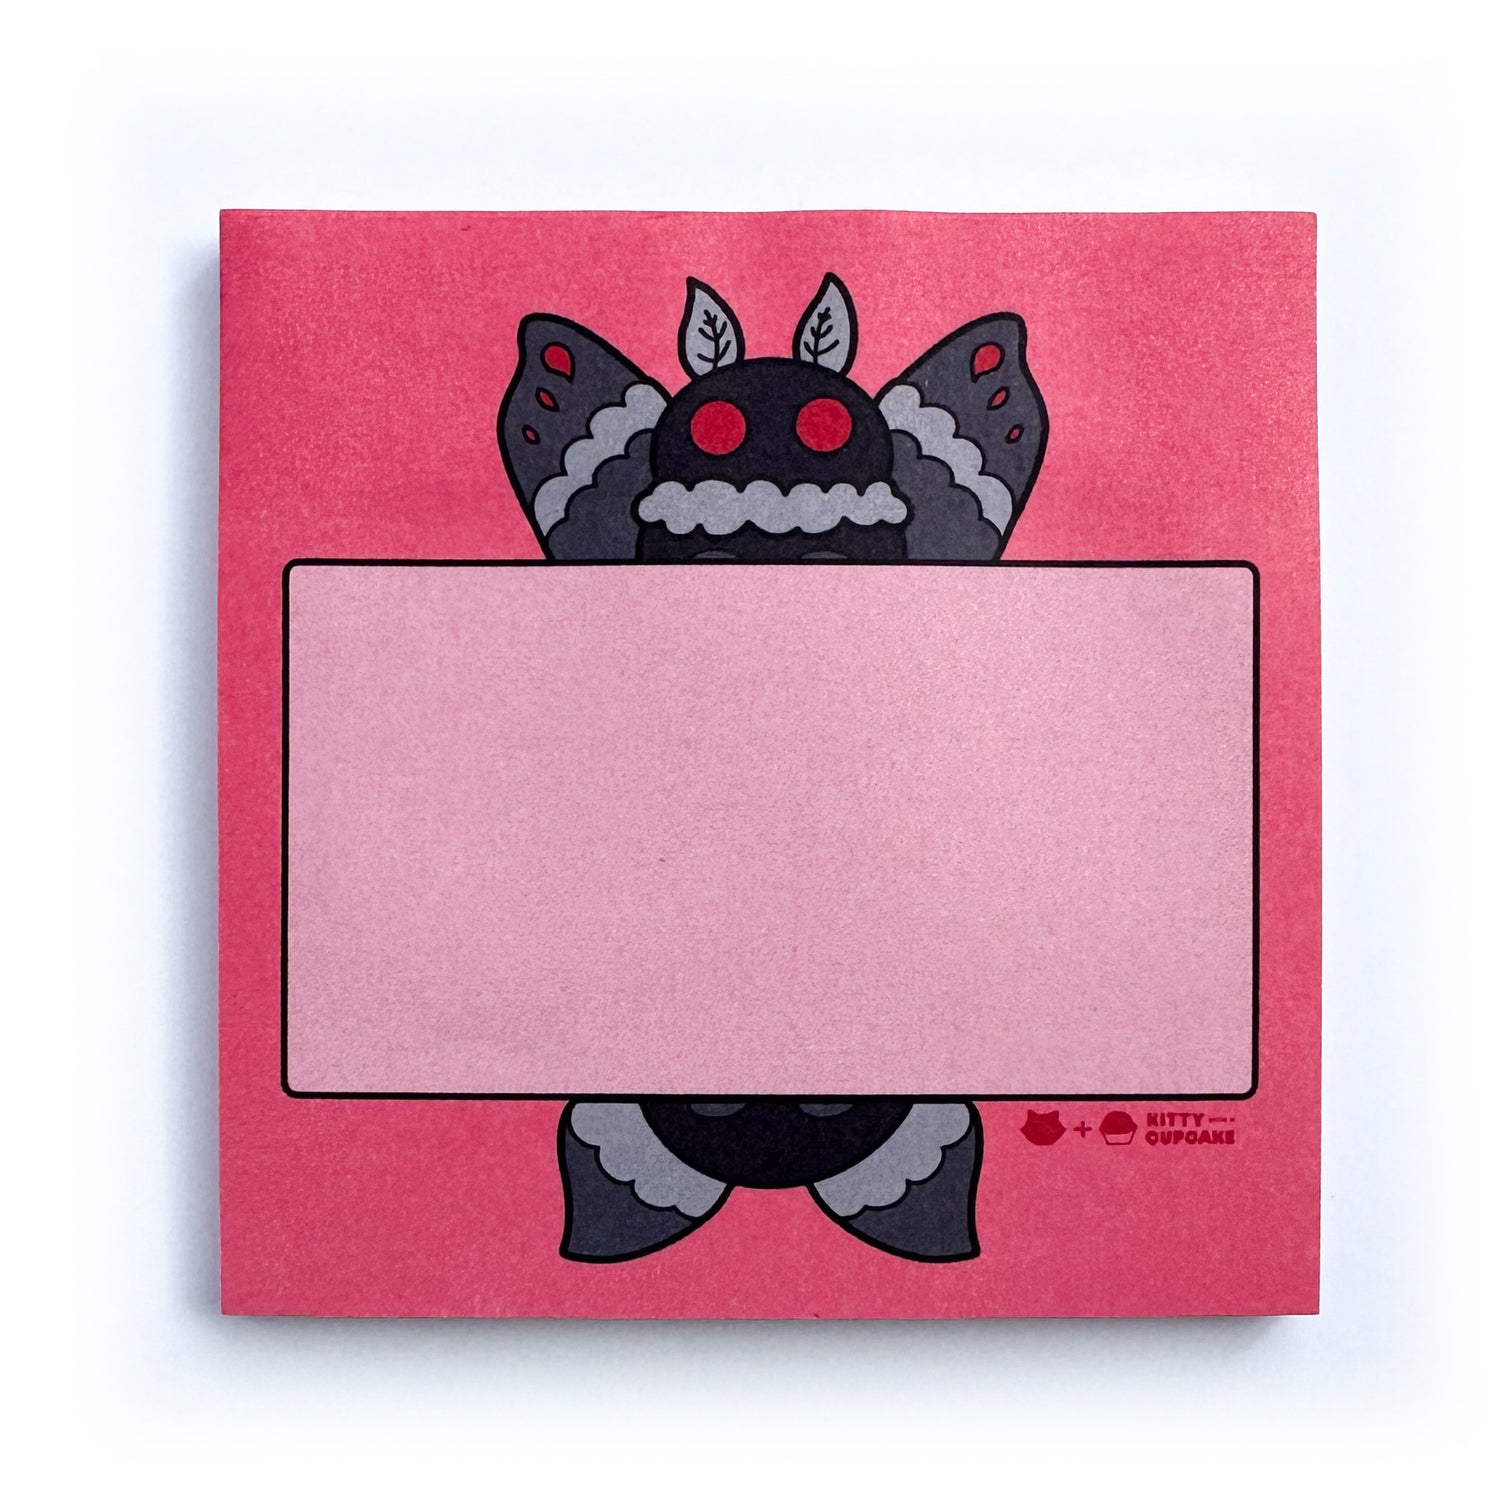 A red square sticky note pad featuring a cute illustration of Mothman holding a pink box for you to write in.